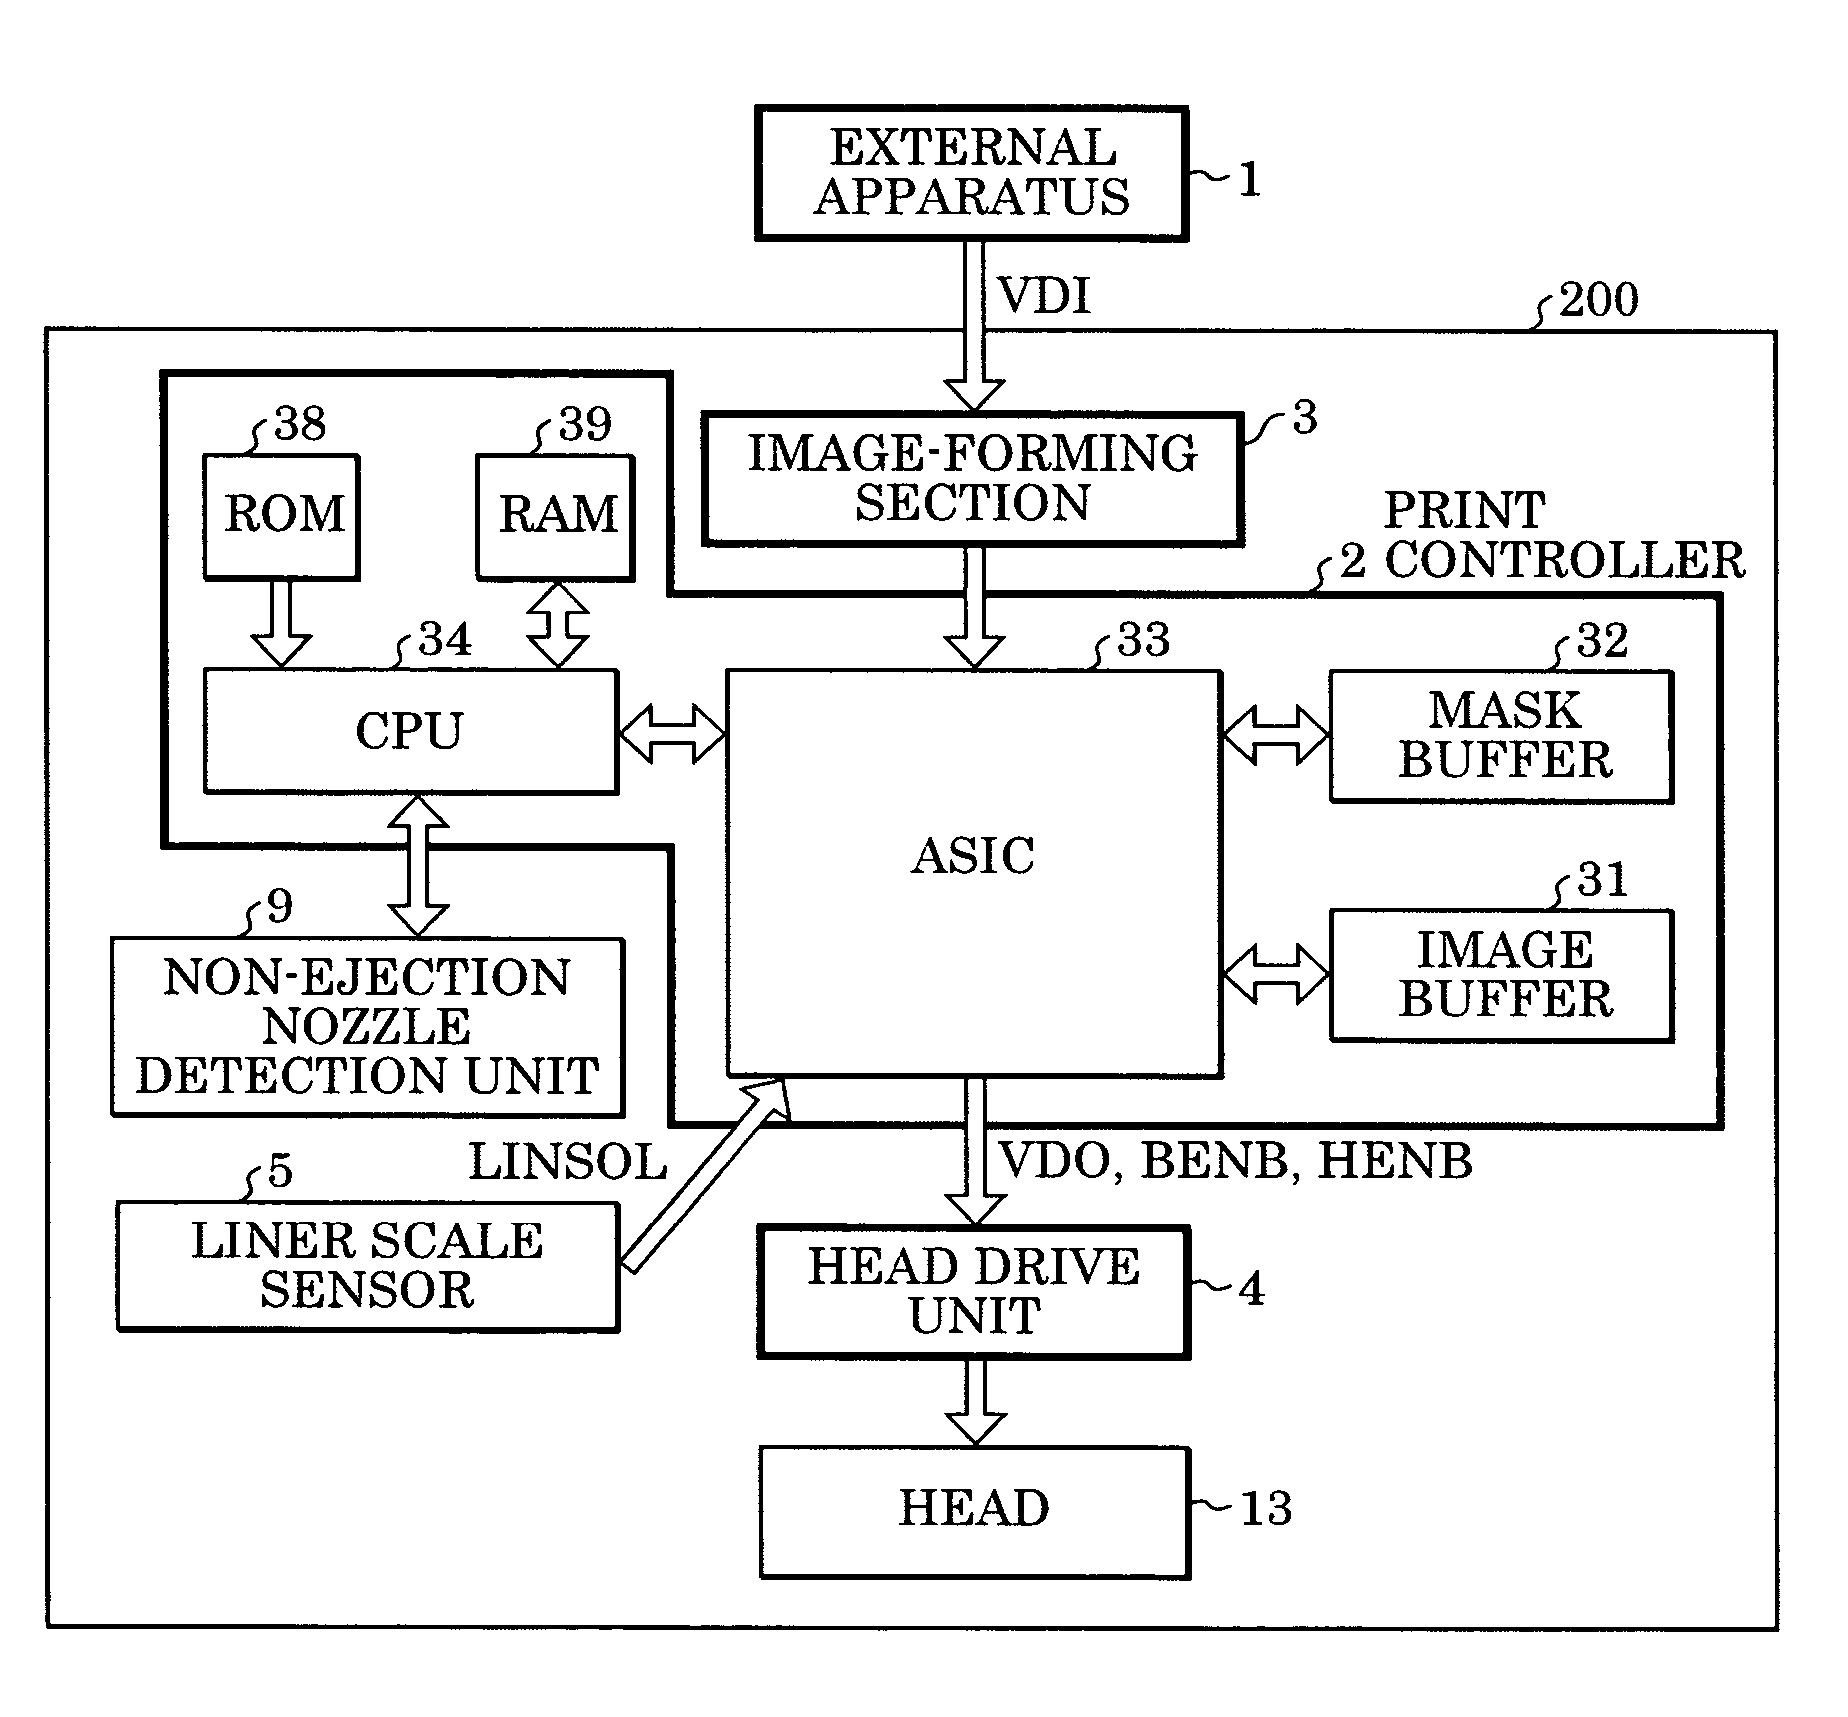 Ink jet recording apparatus and method of controlling the same for complementary recording